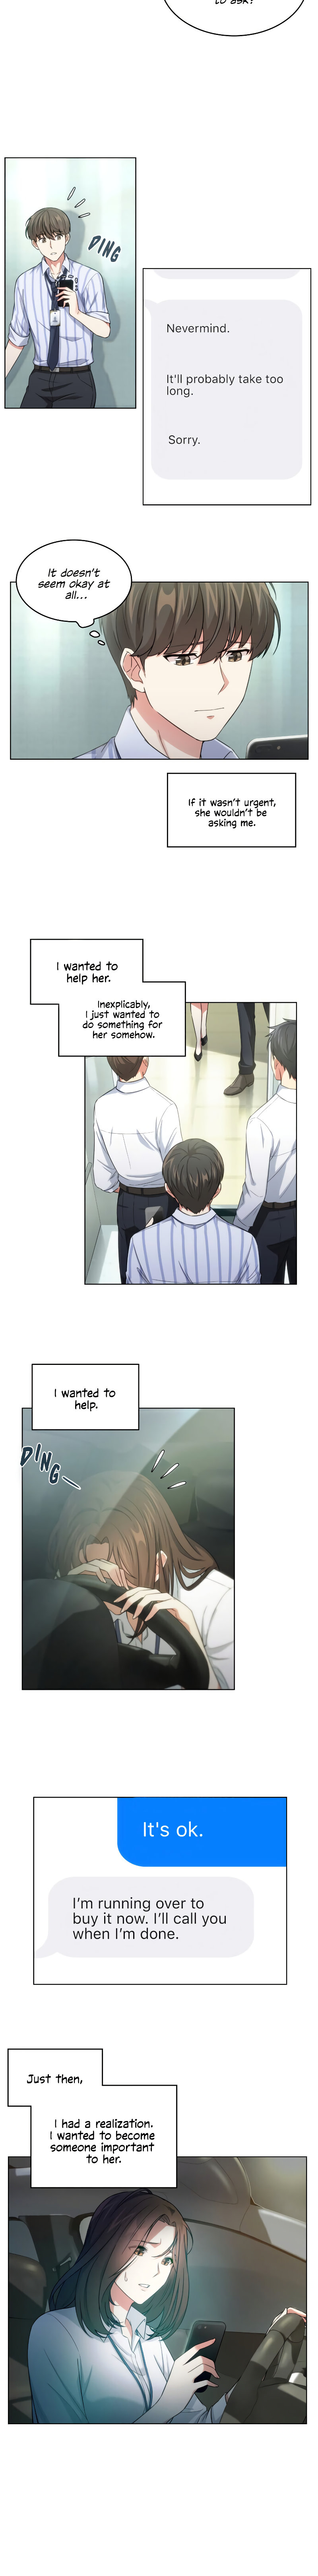 My Office Noona’s Story - Chapter 8 Page 4